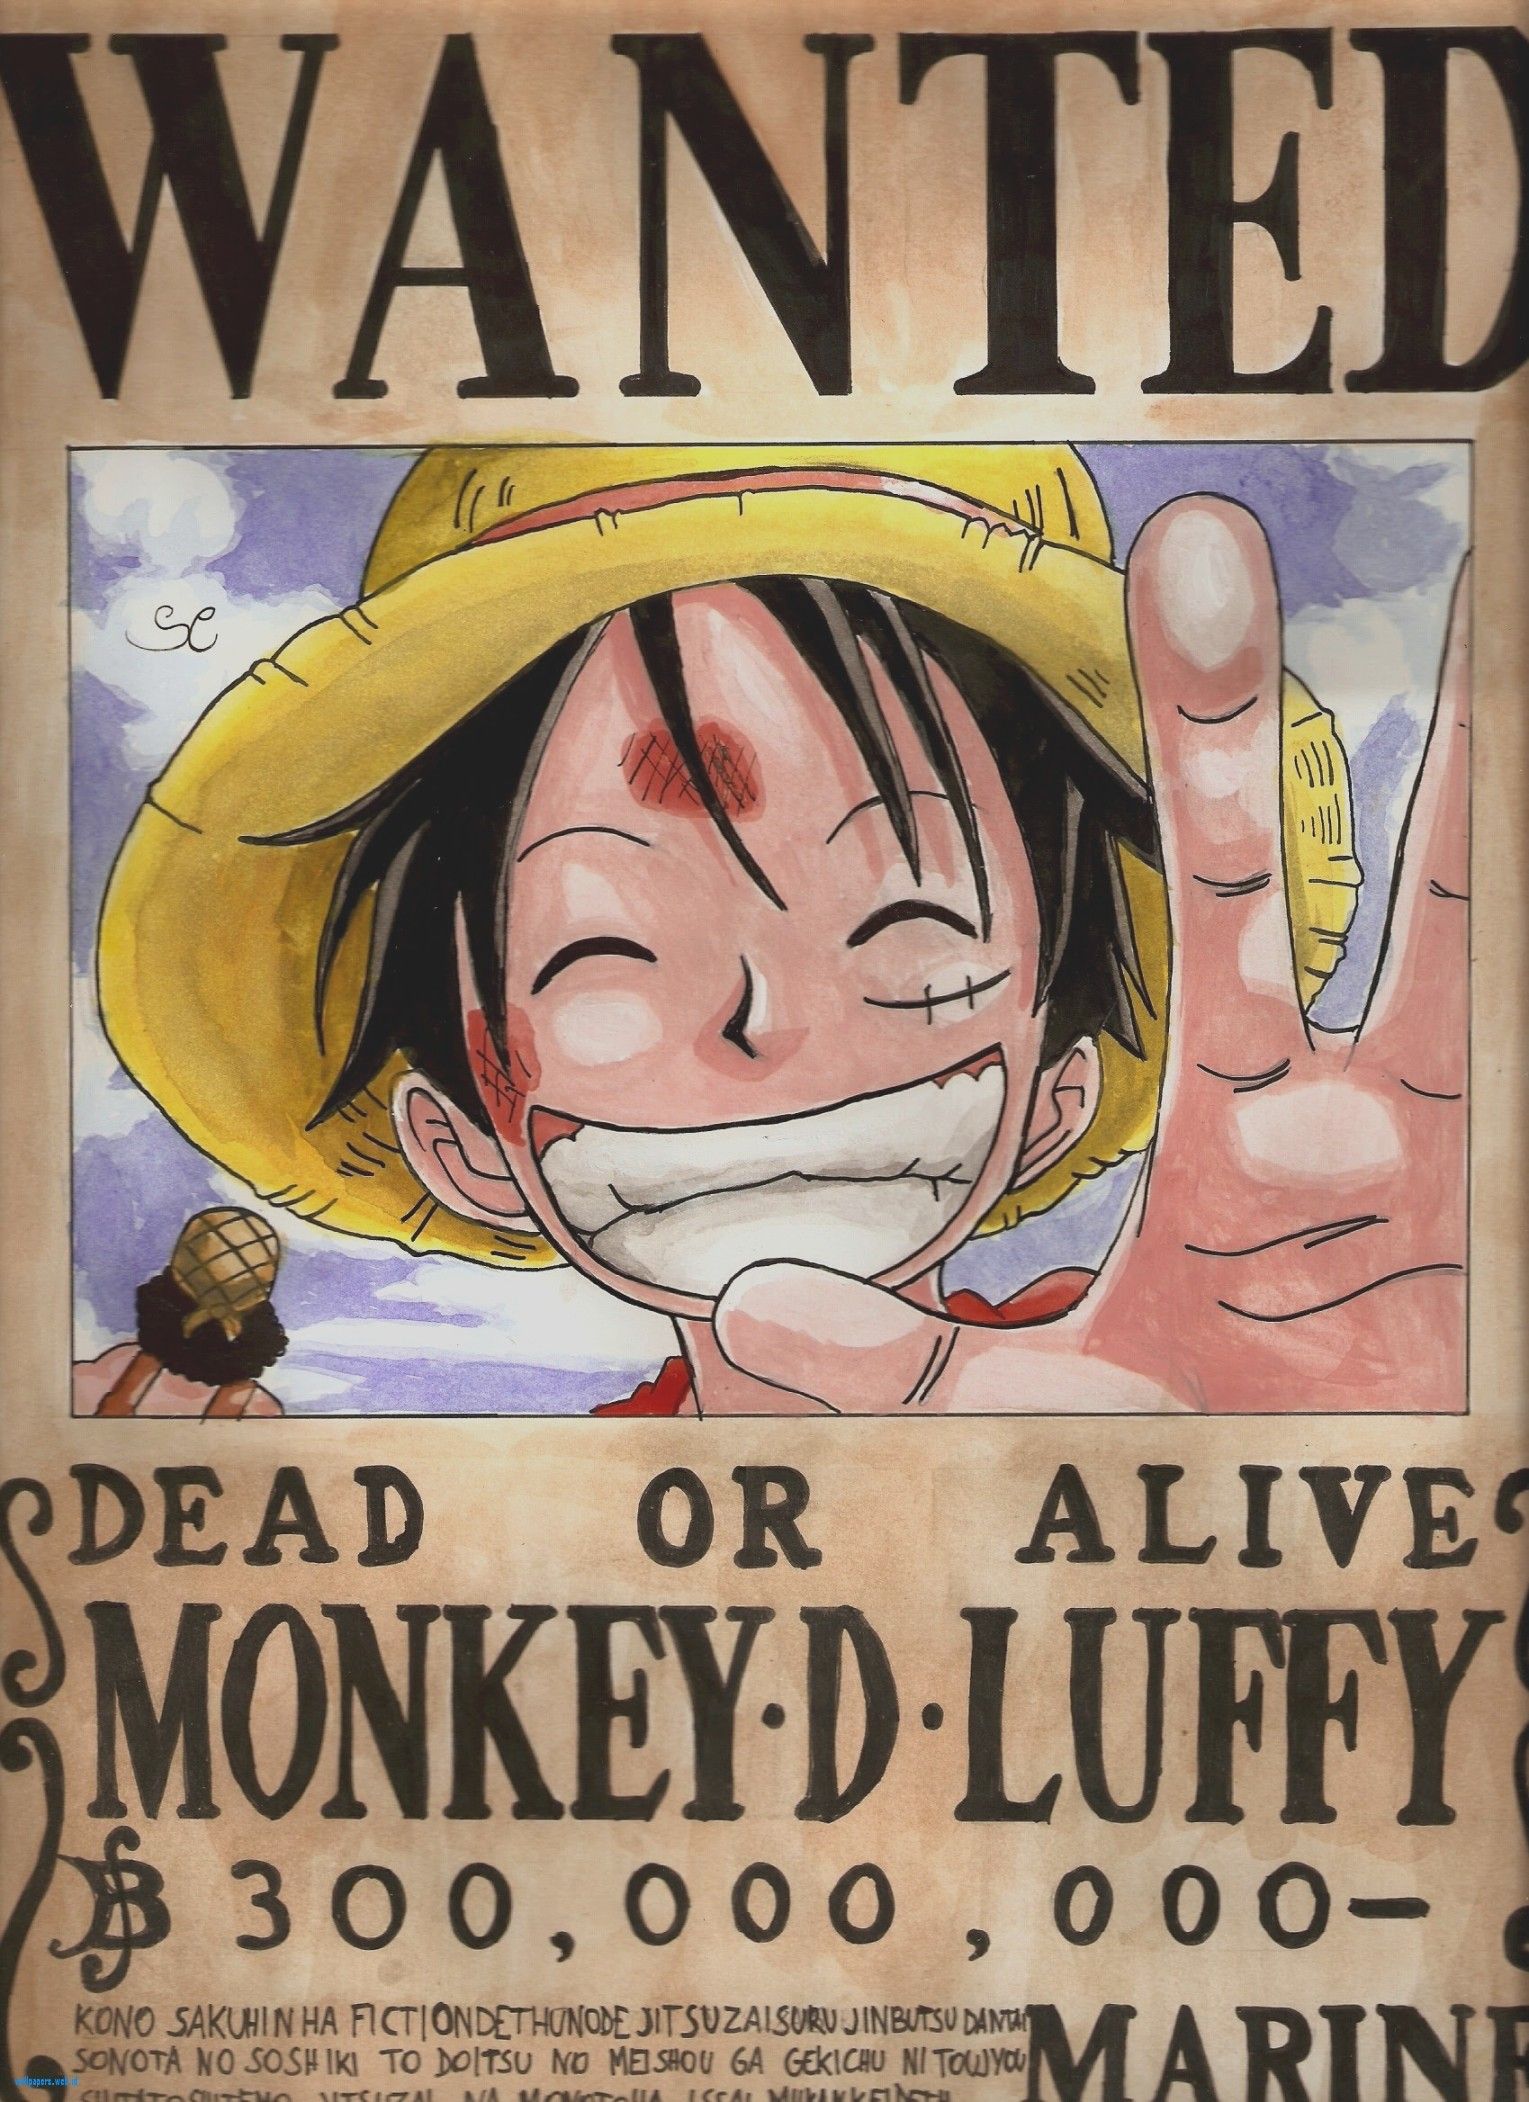 One Piece Bounty Rush 4K Wallpaper 12 variations on YouTube free to use   rOPBR